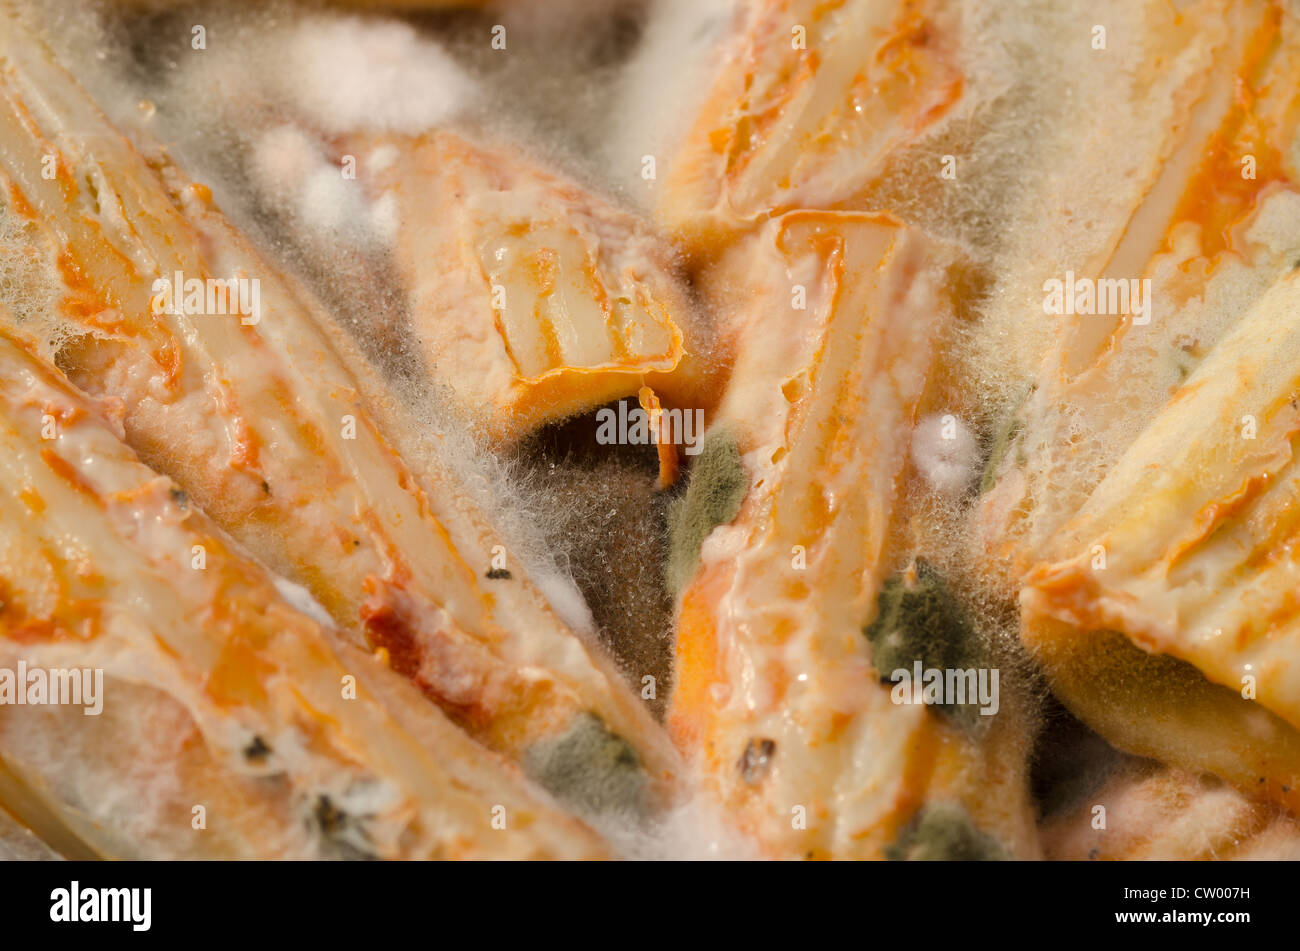 Mouldy pasta lunch box school meal forgotten penicillin growth impregnated with hyphae long branching filamentous structure Stock Photo